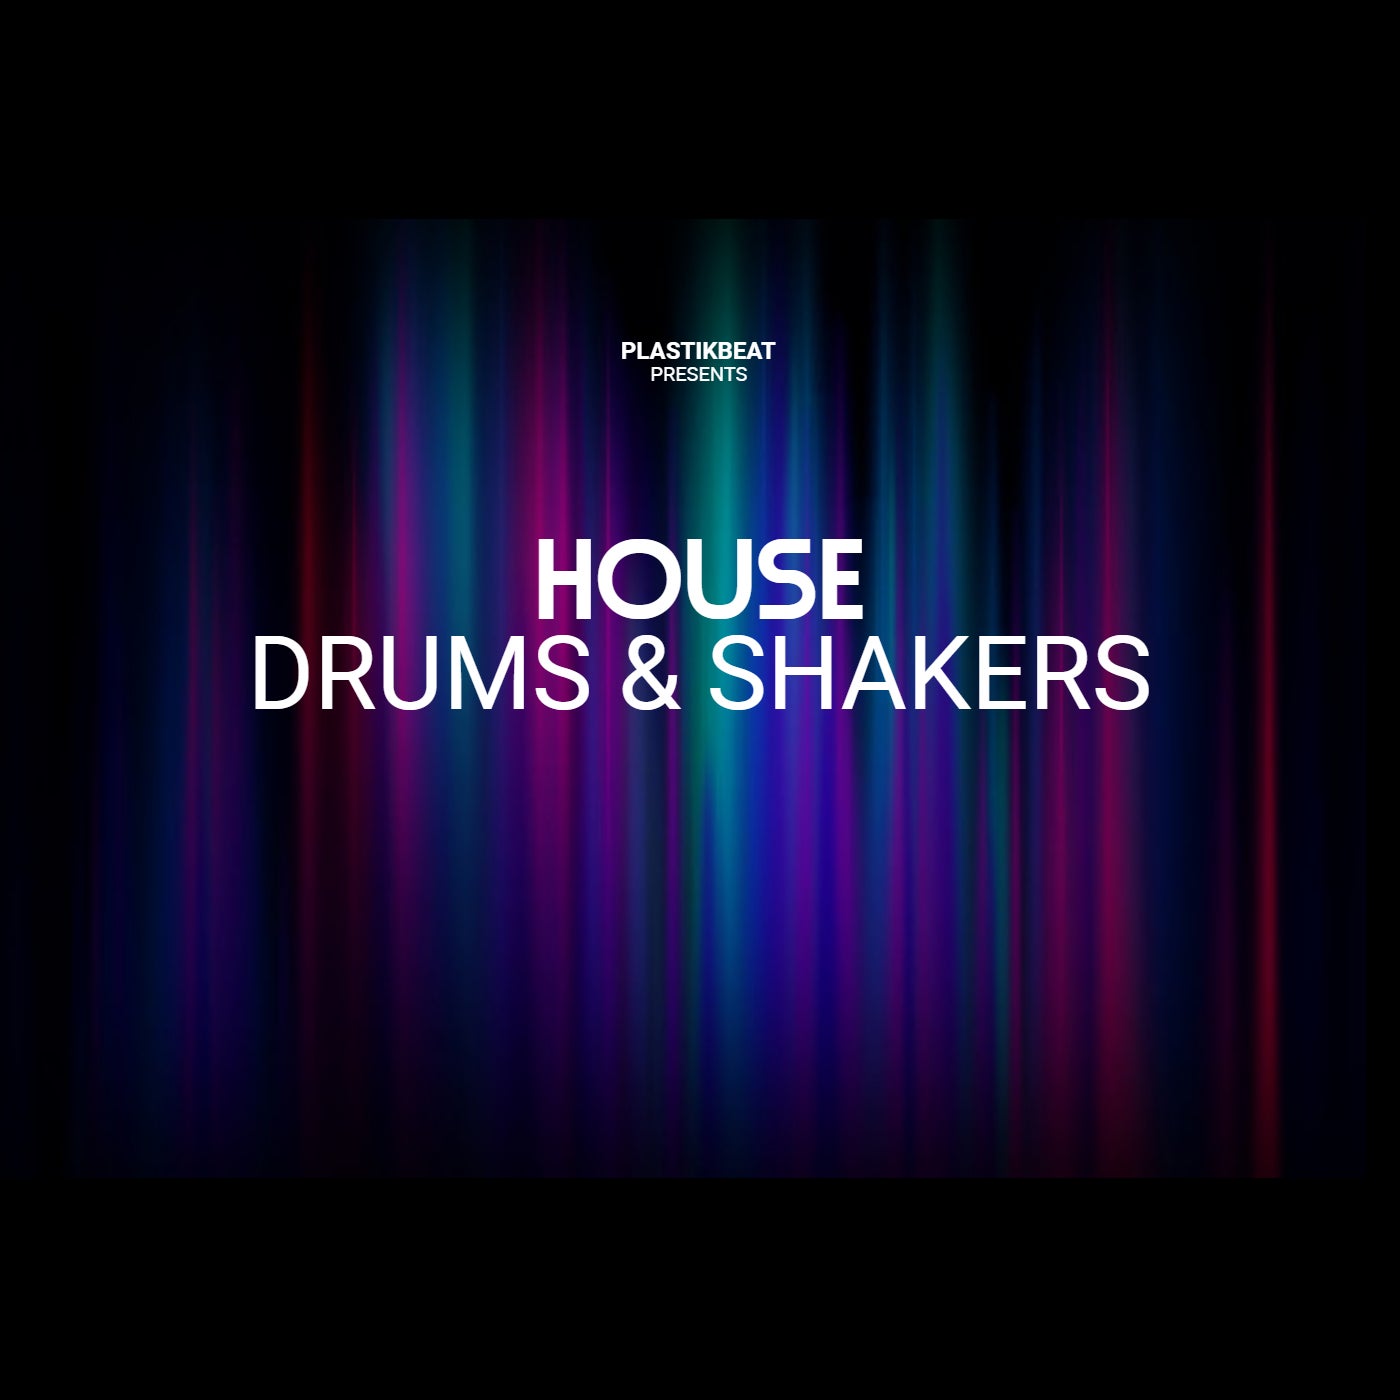 House Drums & Shakers